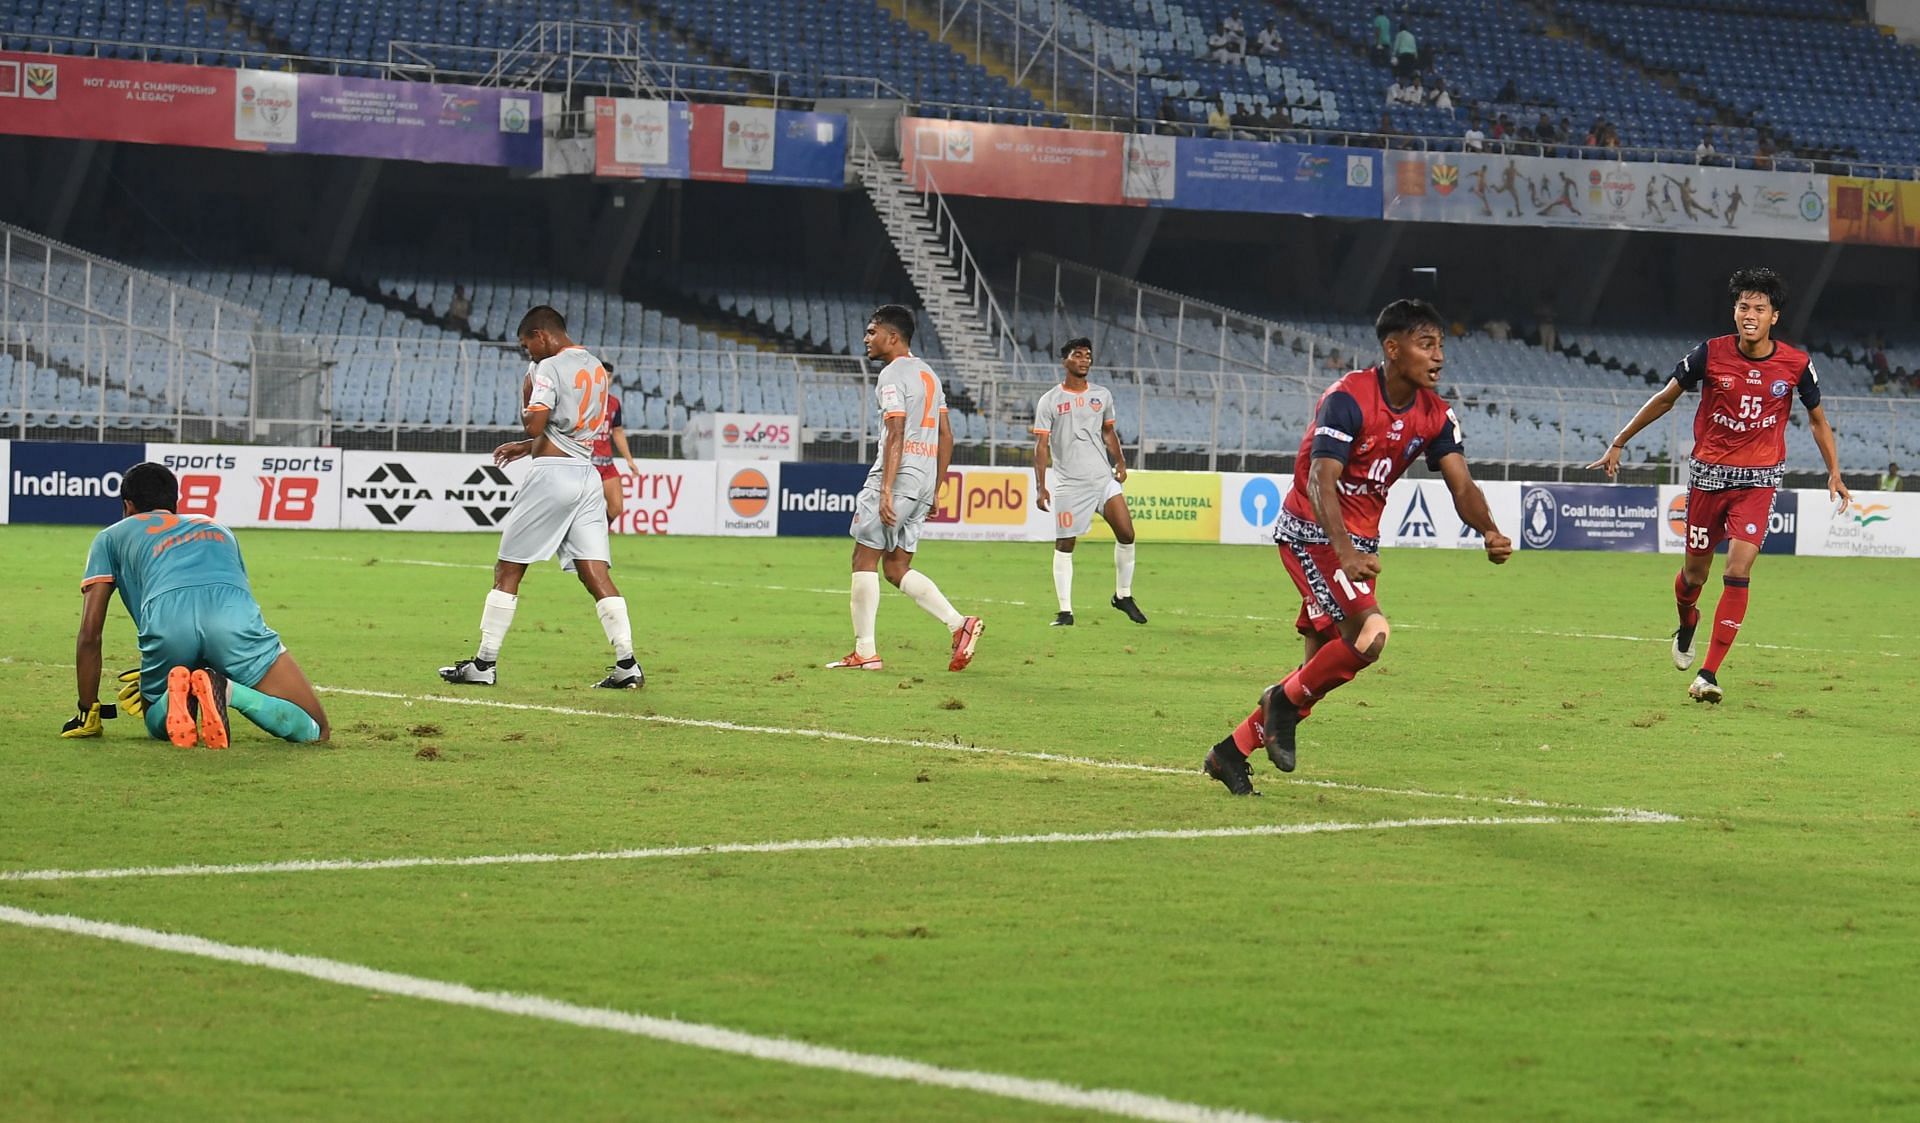 JFC beat FC Goa in a close encounter. [Credits: Suman Chattopadhyay / www.imagesolutionr.in]